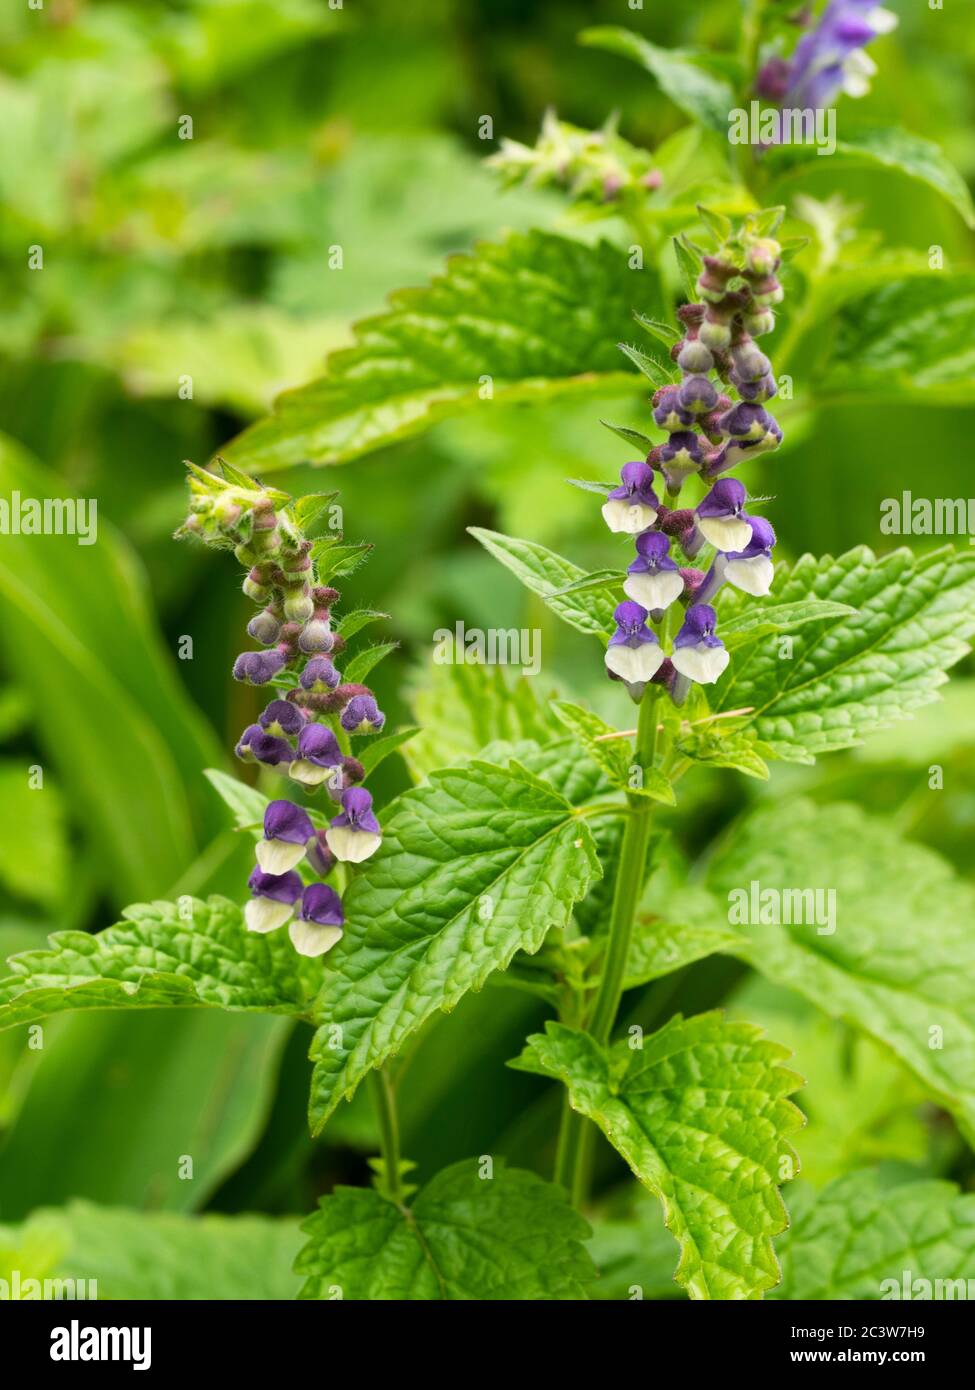 Spikes of hooded purple and white summer flowers of the hardy perennial Somerset skullcap, Scutellaria altissima Stock Photo